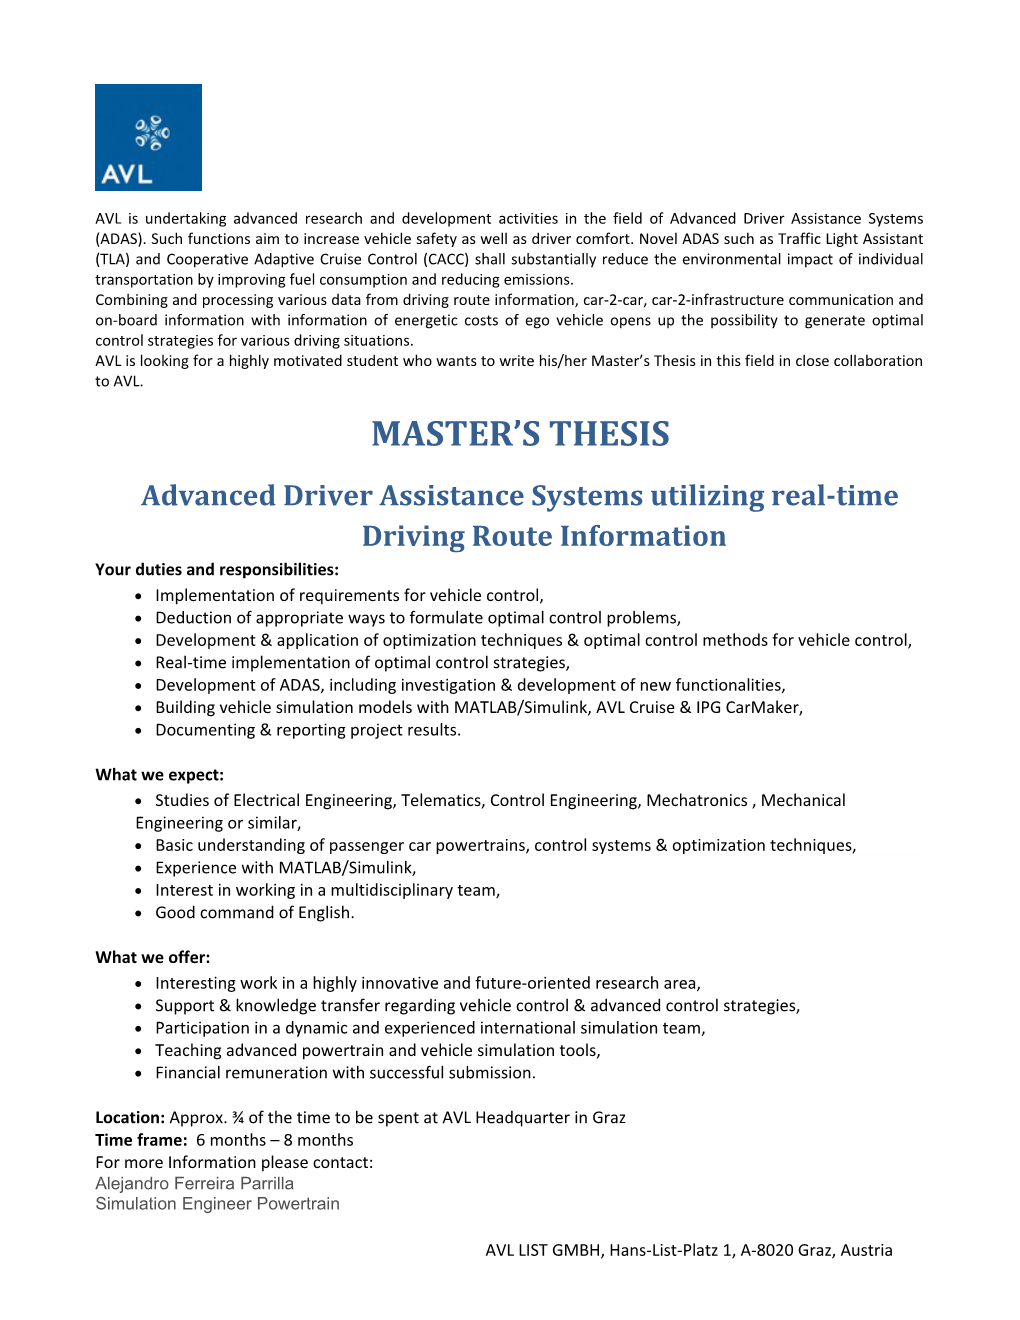 Advanced Driver Assistance Systems Utilizing Real-Time Driving Route Information